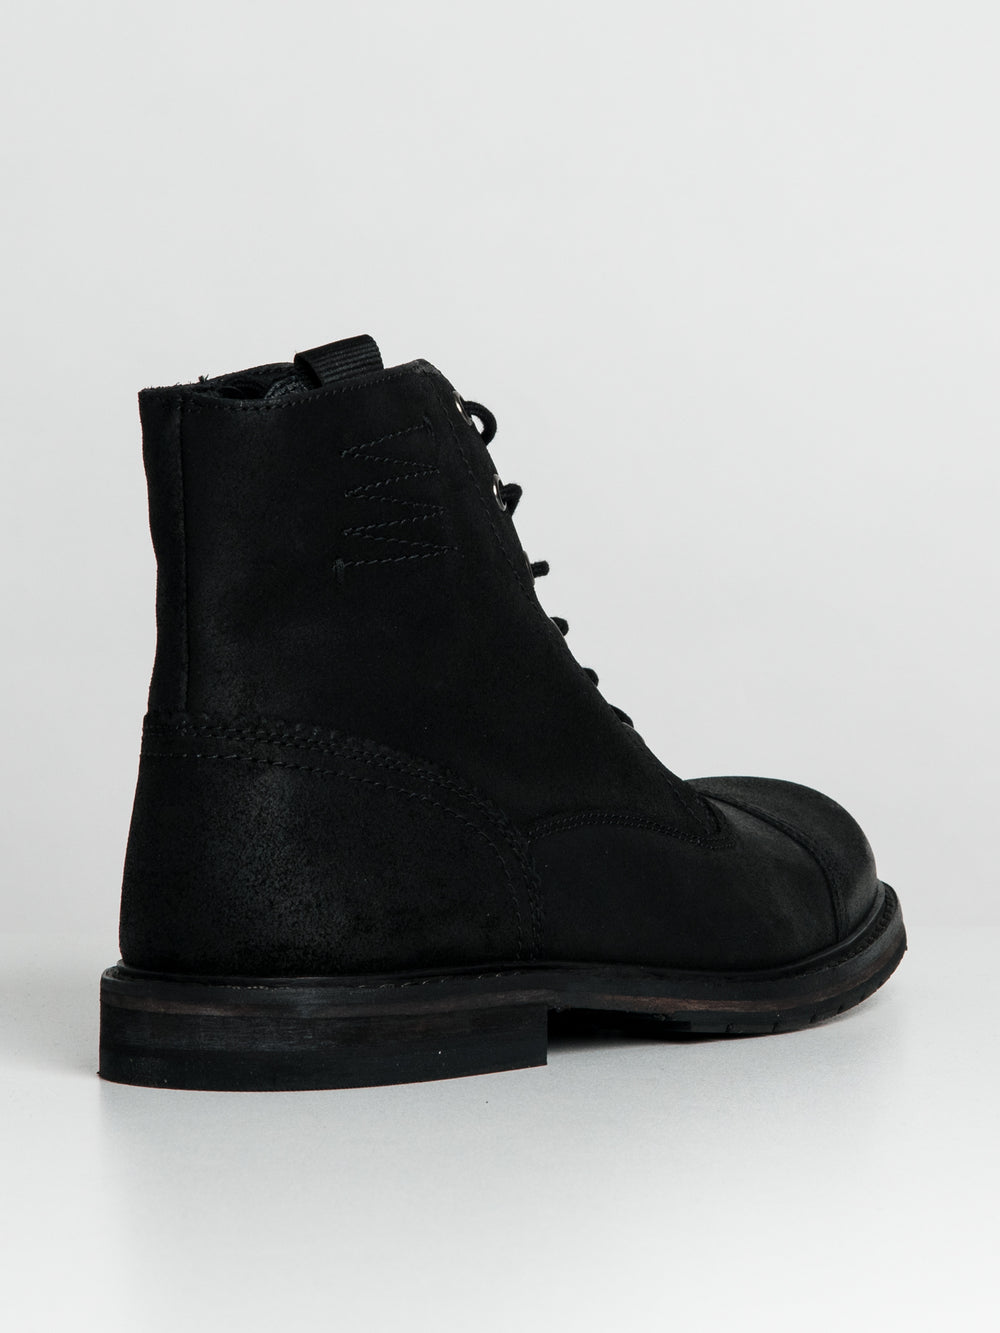 MENS CLARKS CLARKDALE WEST BOOT - CLEARANCE